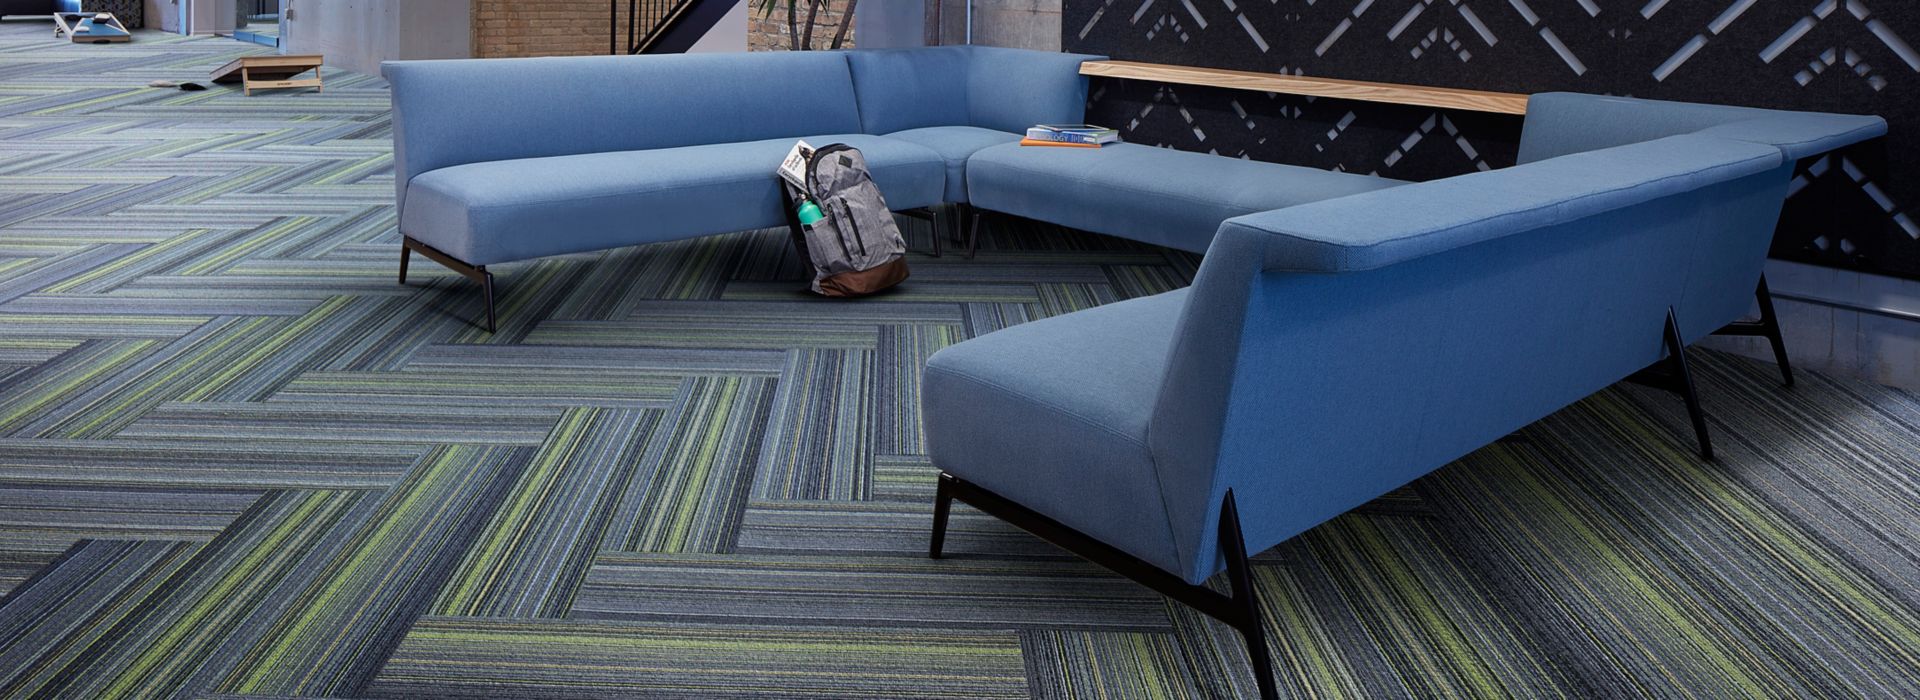 Interface Aglow and Reflectors plank carpet tile in lobby area with blue sectional